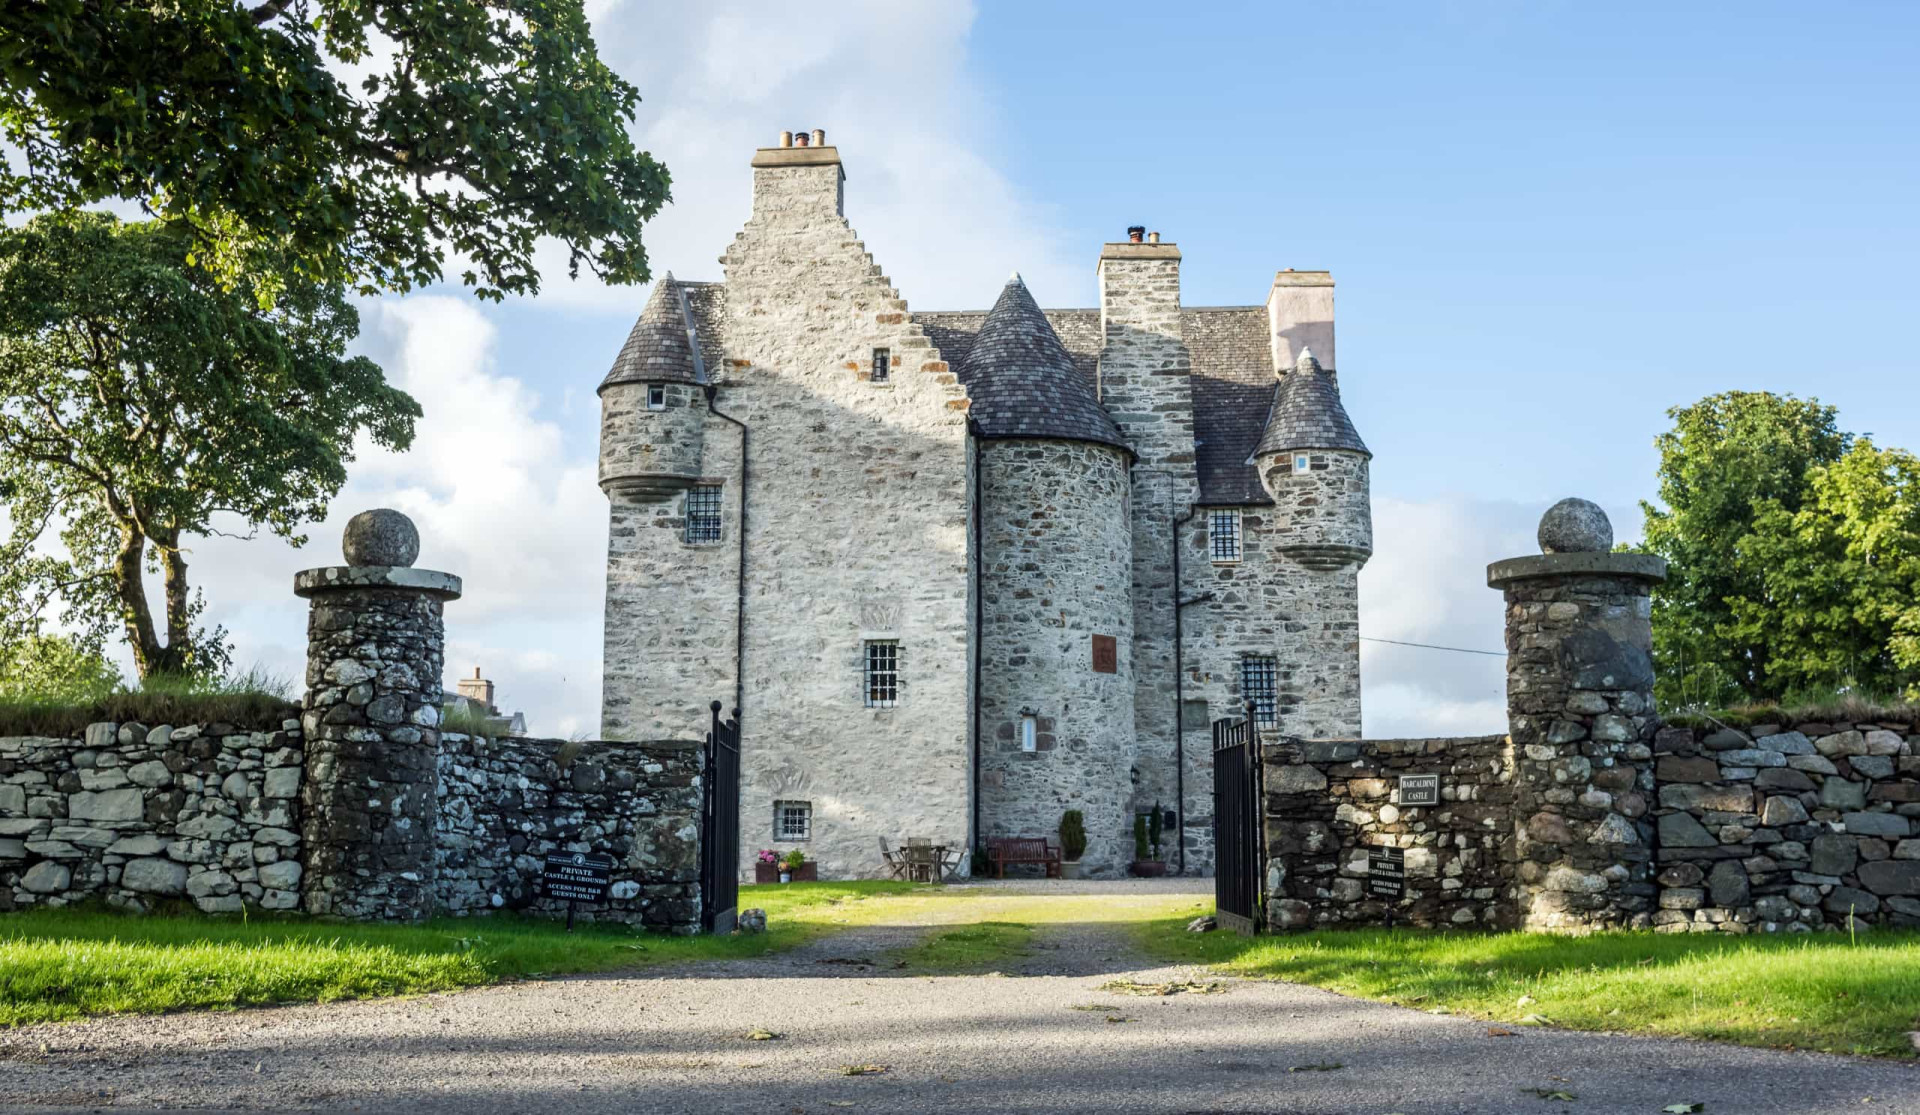 <p>These days it's a luxury guest house, but the friendly-looking Barcaldine Castle in scenic Argyll may be hosting a ghostly presence. Built in 1609, the castle is popular with ghost hunters, who have reported spooky sightings in the Great Hall.</p><p><a href="https://www.msn.com/en-ca/community/channel/vid-7xx8mnucu55yw63we9va2gwr7uihbxwc68fxqp25x6tg4ftibpra?cvid=94631541bc0f4f89bfd59158d696ad7e">Follow us and access great exclusive content every day</a></p>